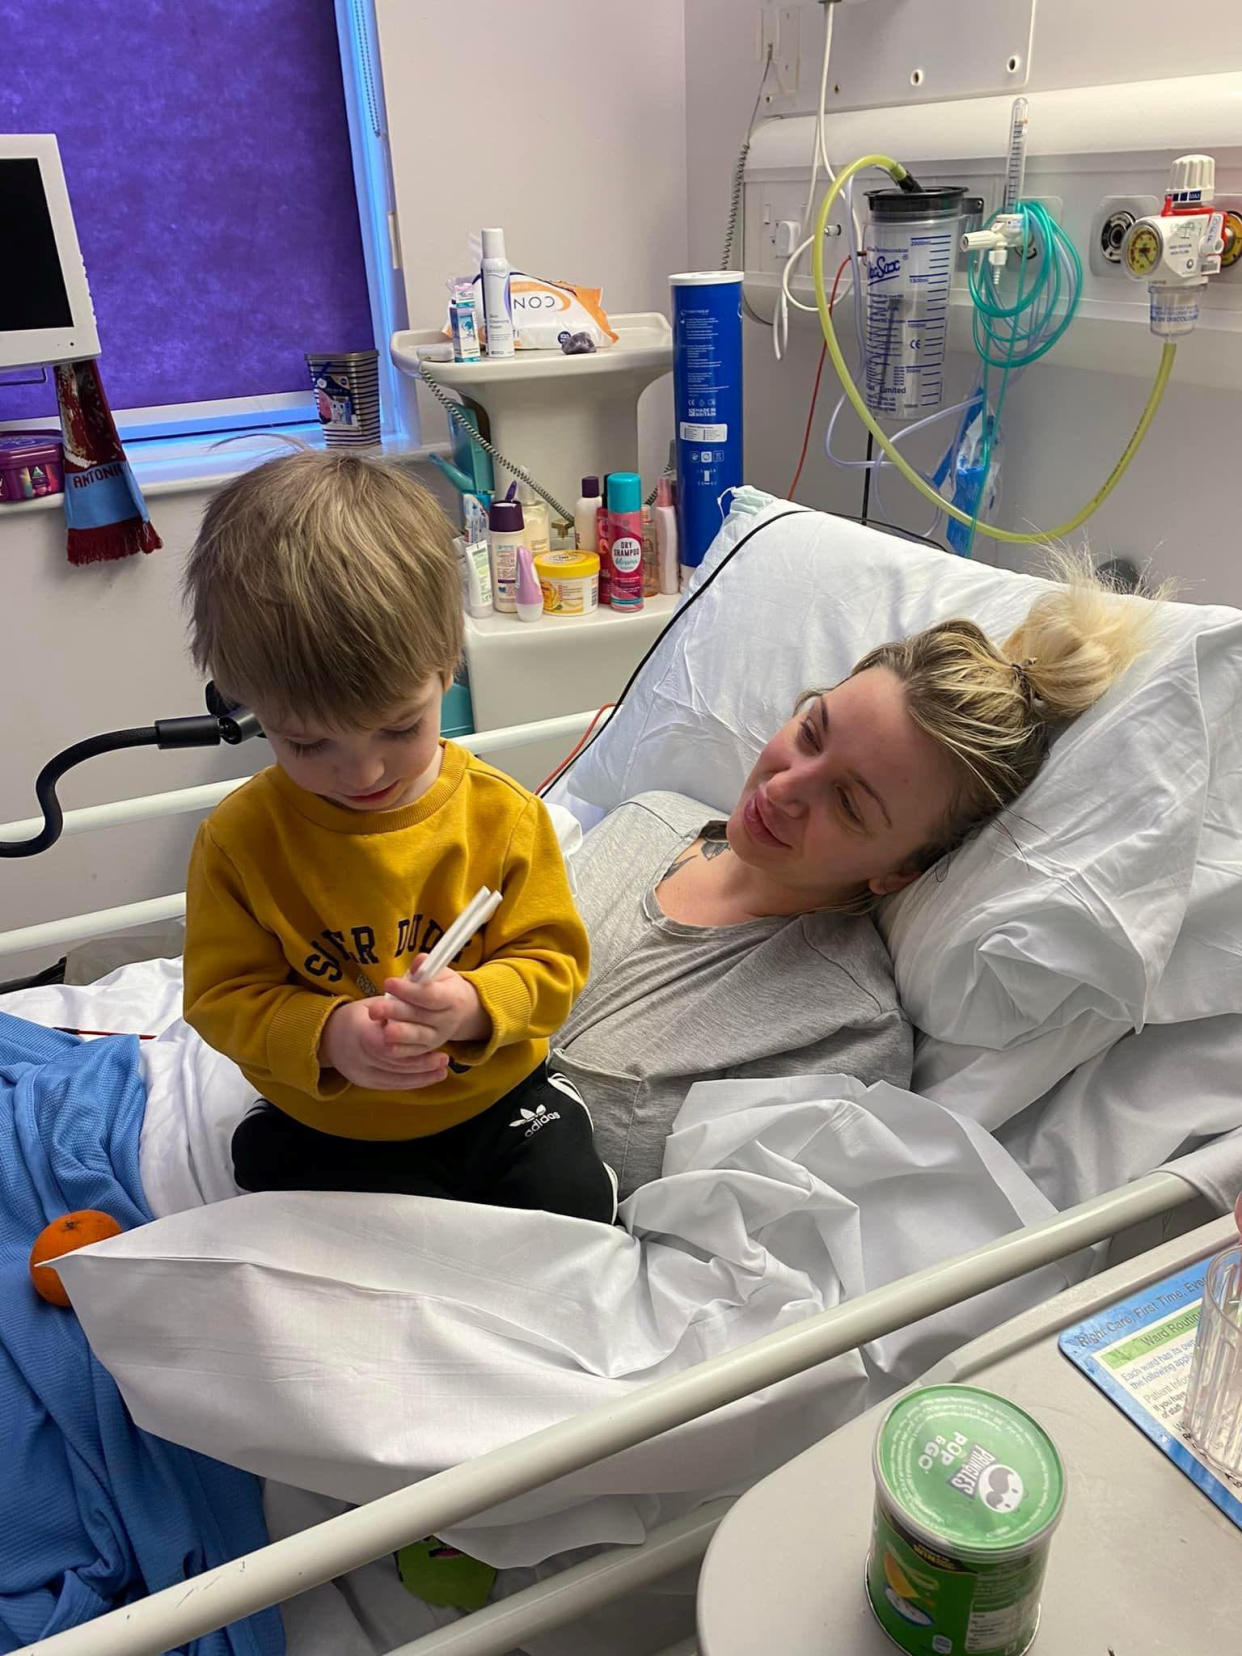 Sadie Kemp with son Hendrix in hospital. (SWNS)